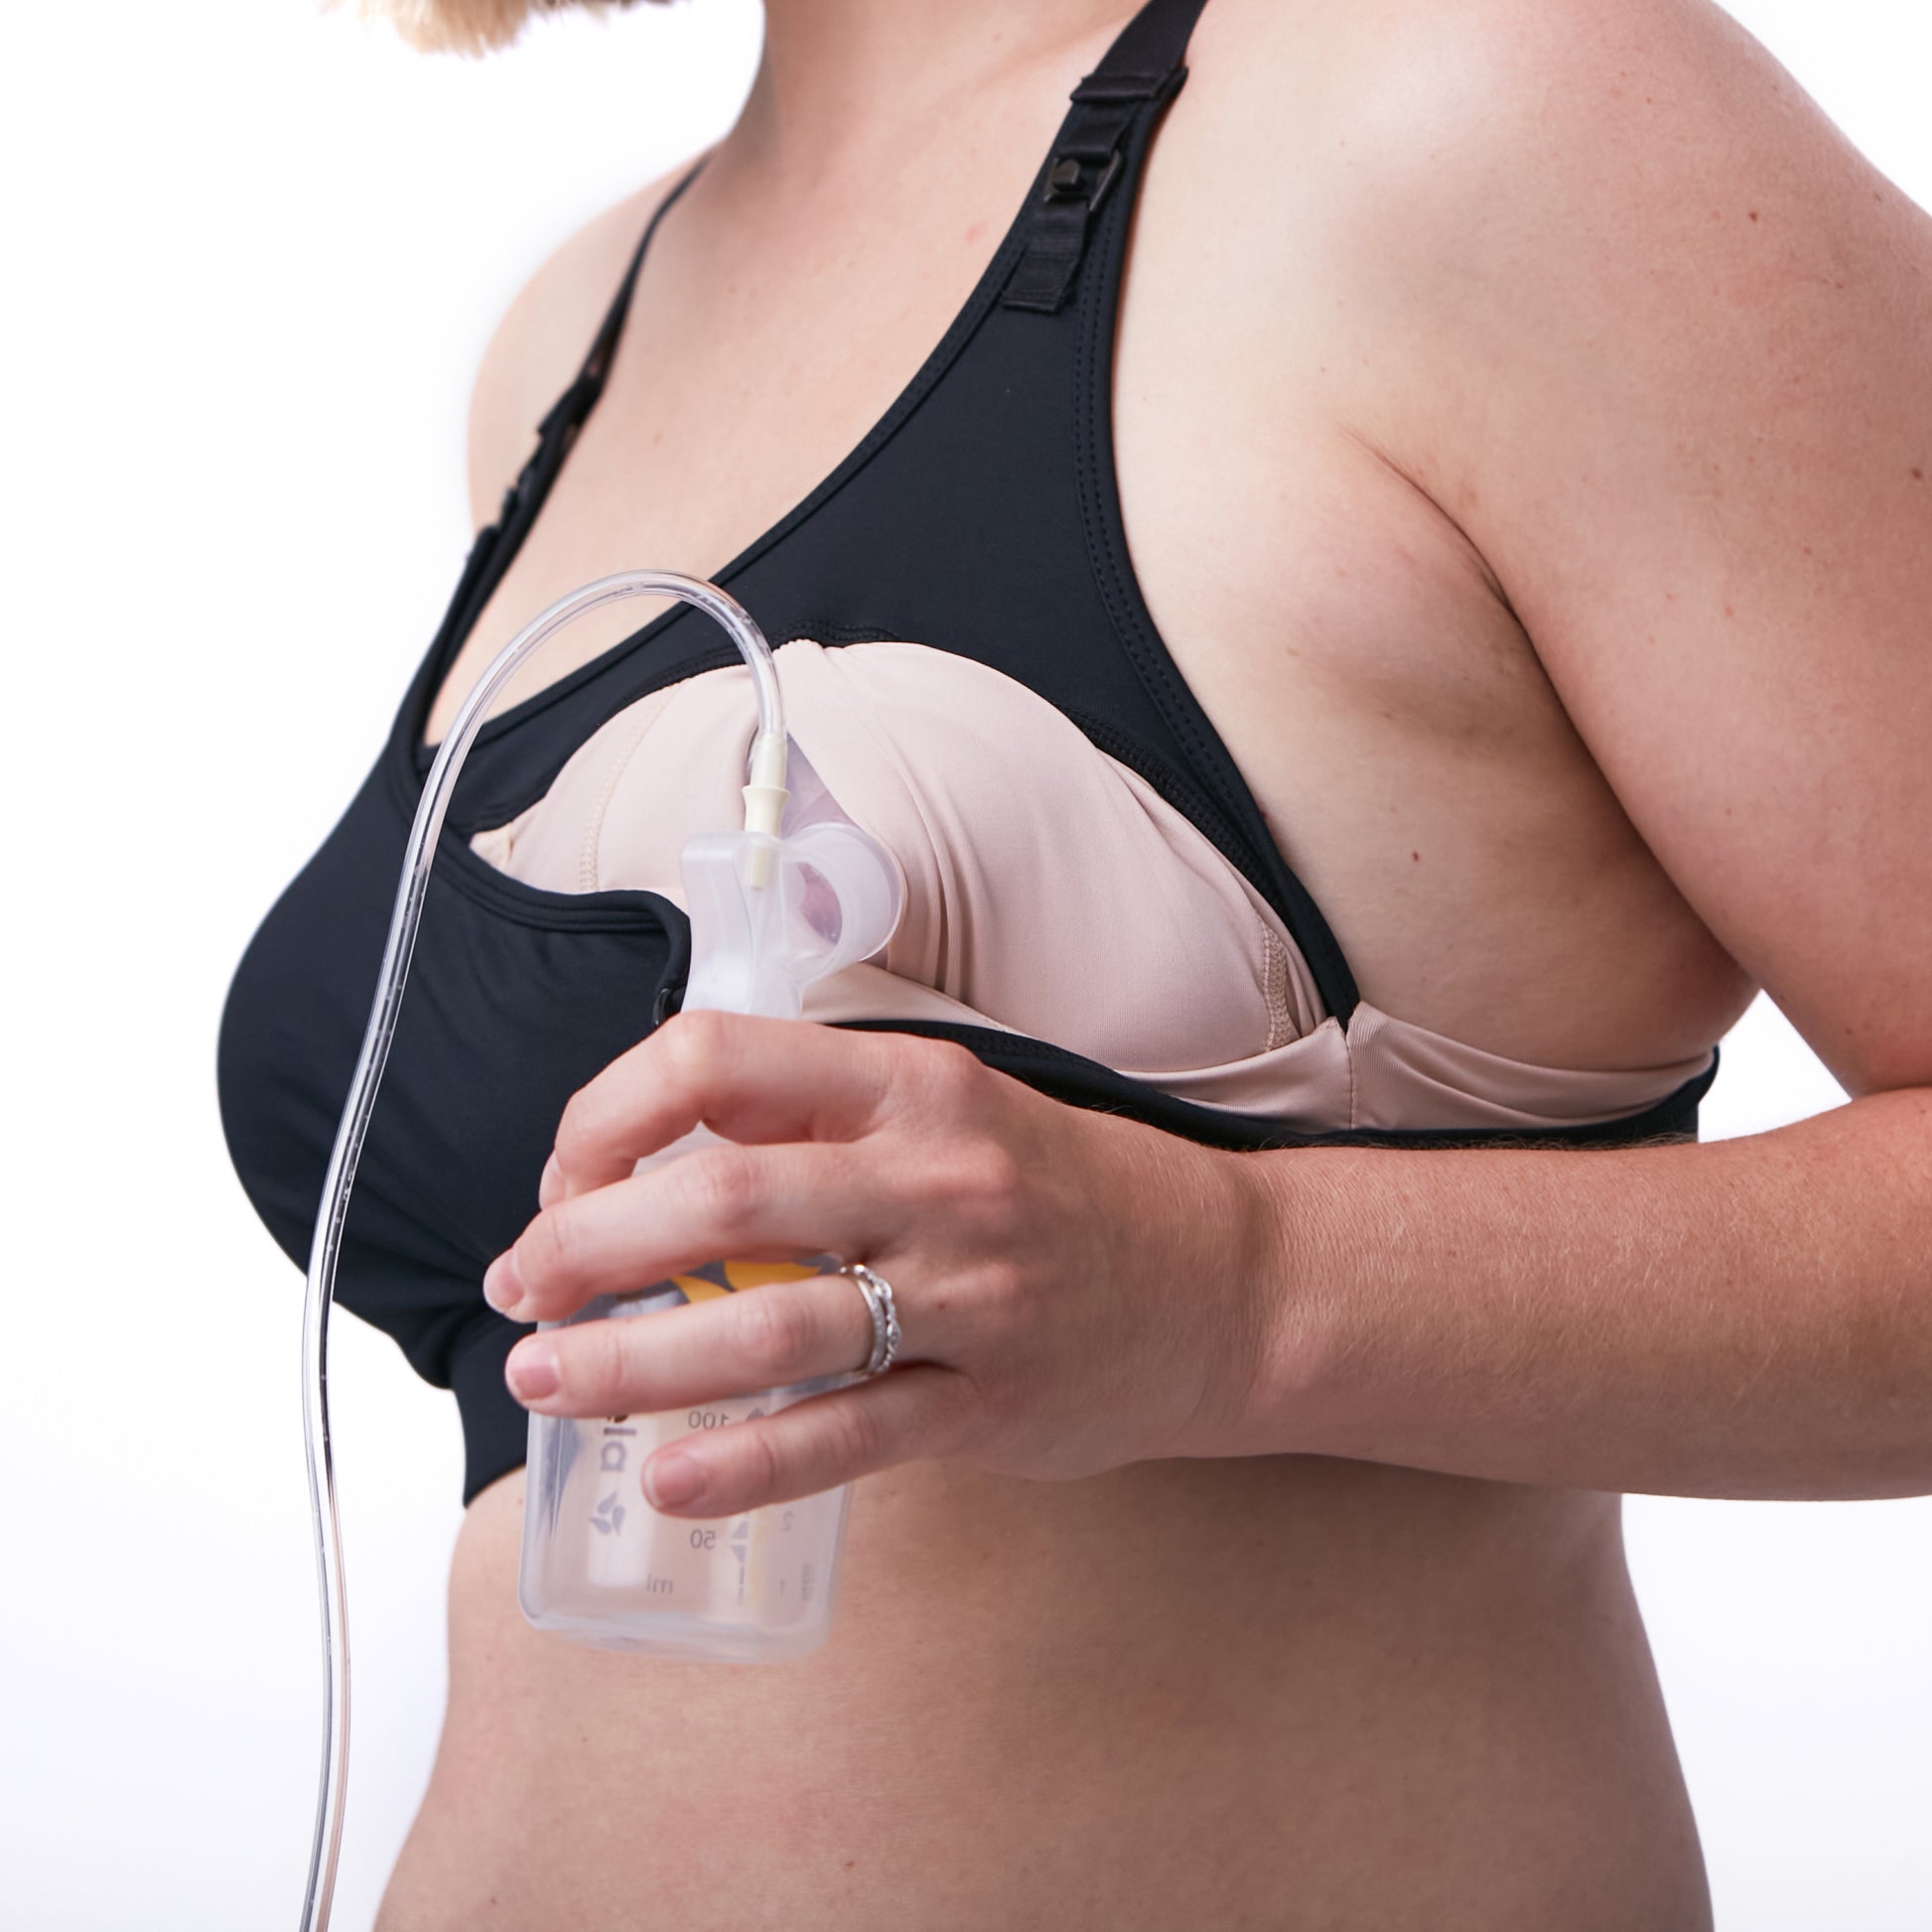 Pumping Bra Hands Free, Adjustable Breast Pump Bra And Nursing Bra All In  One, All Day Wear For Most Breast